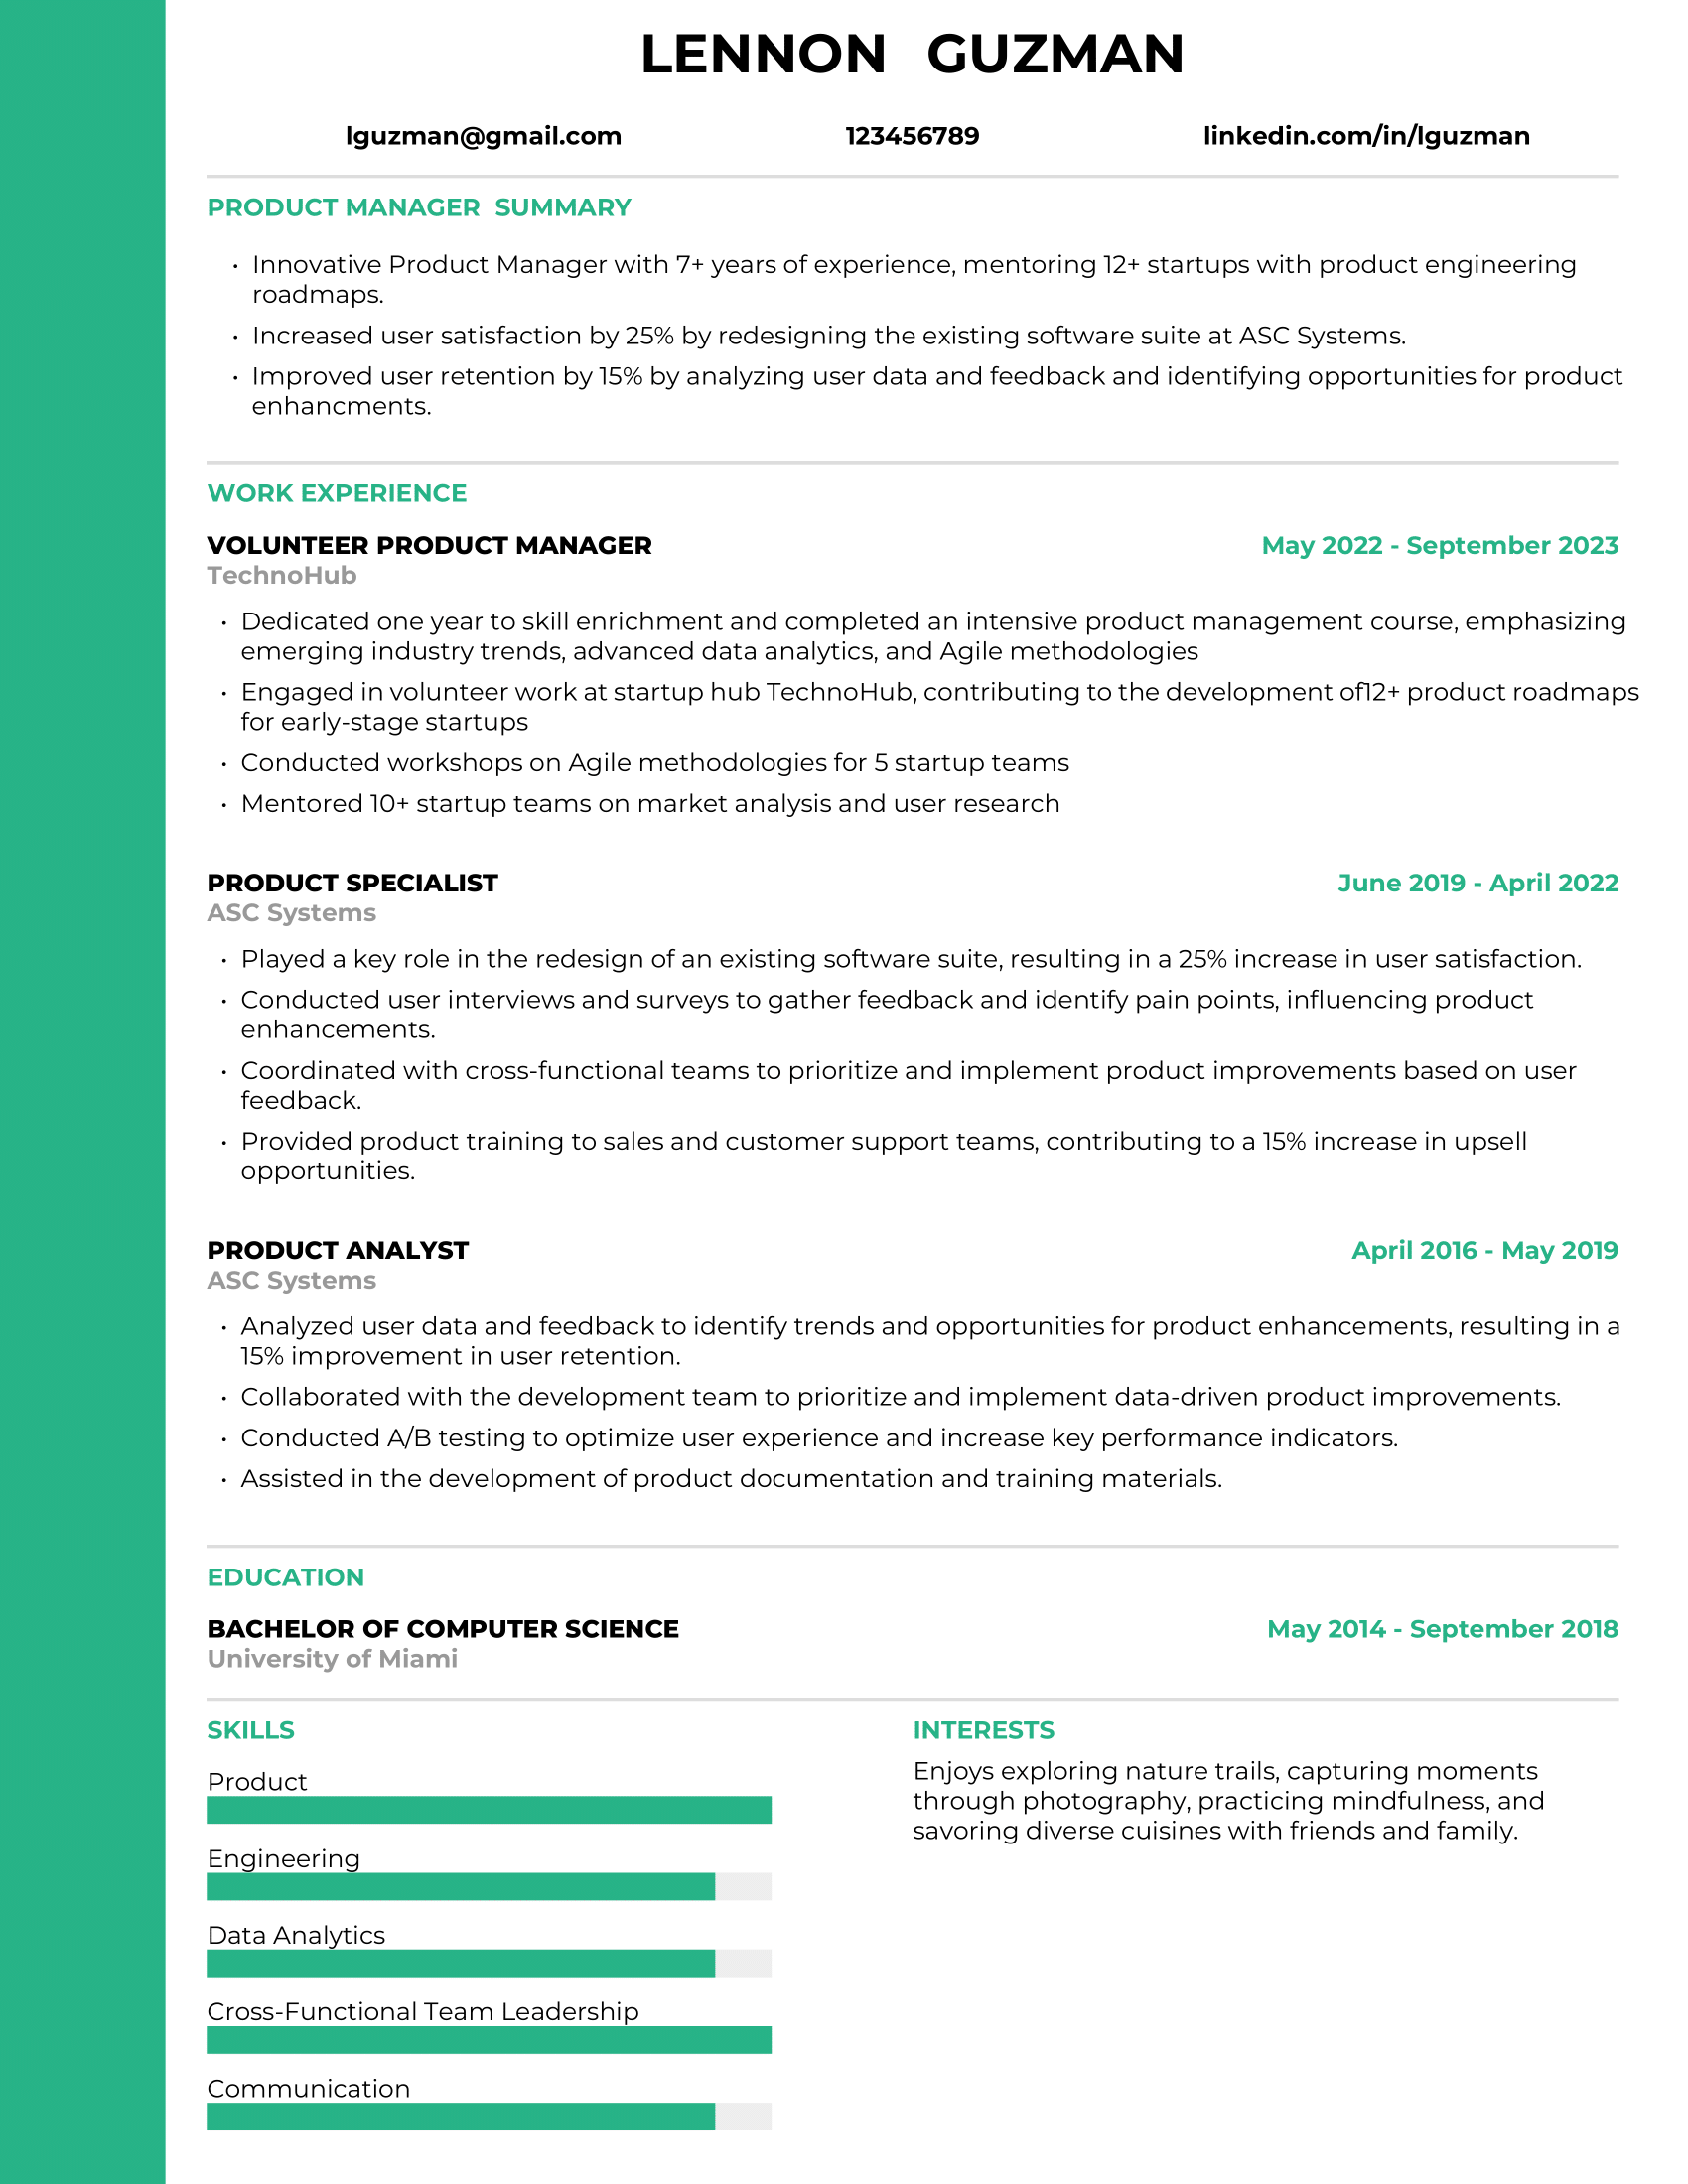 Product Manager Resume Example #3 - Career Gap